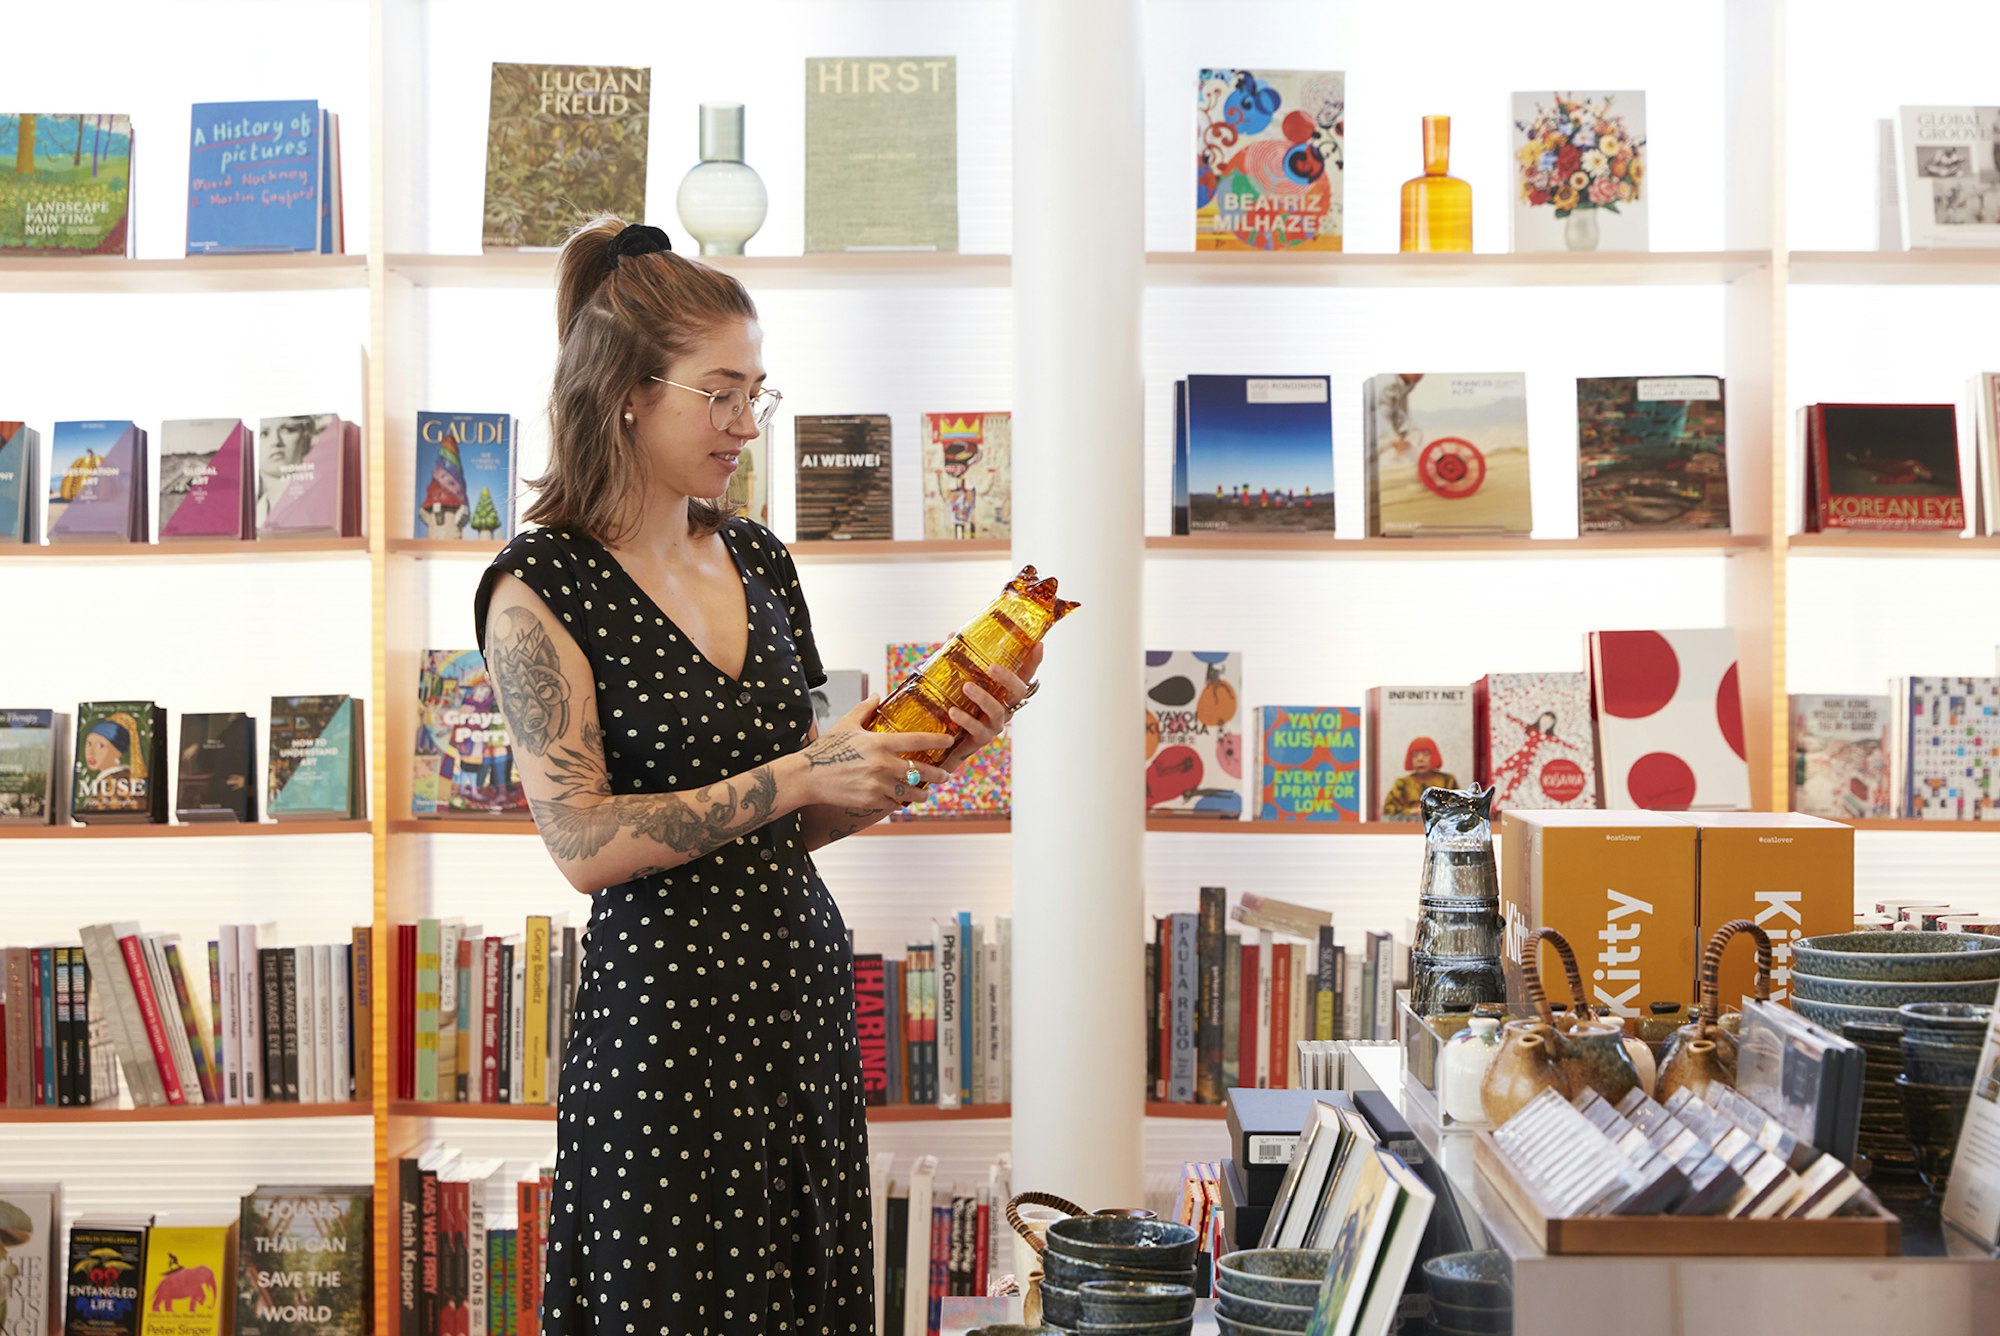 A person stands holding an object in front of bookshelves and a display of objects